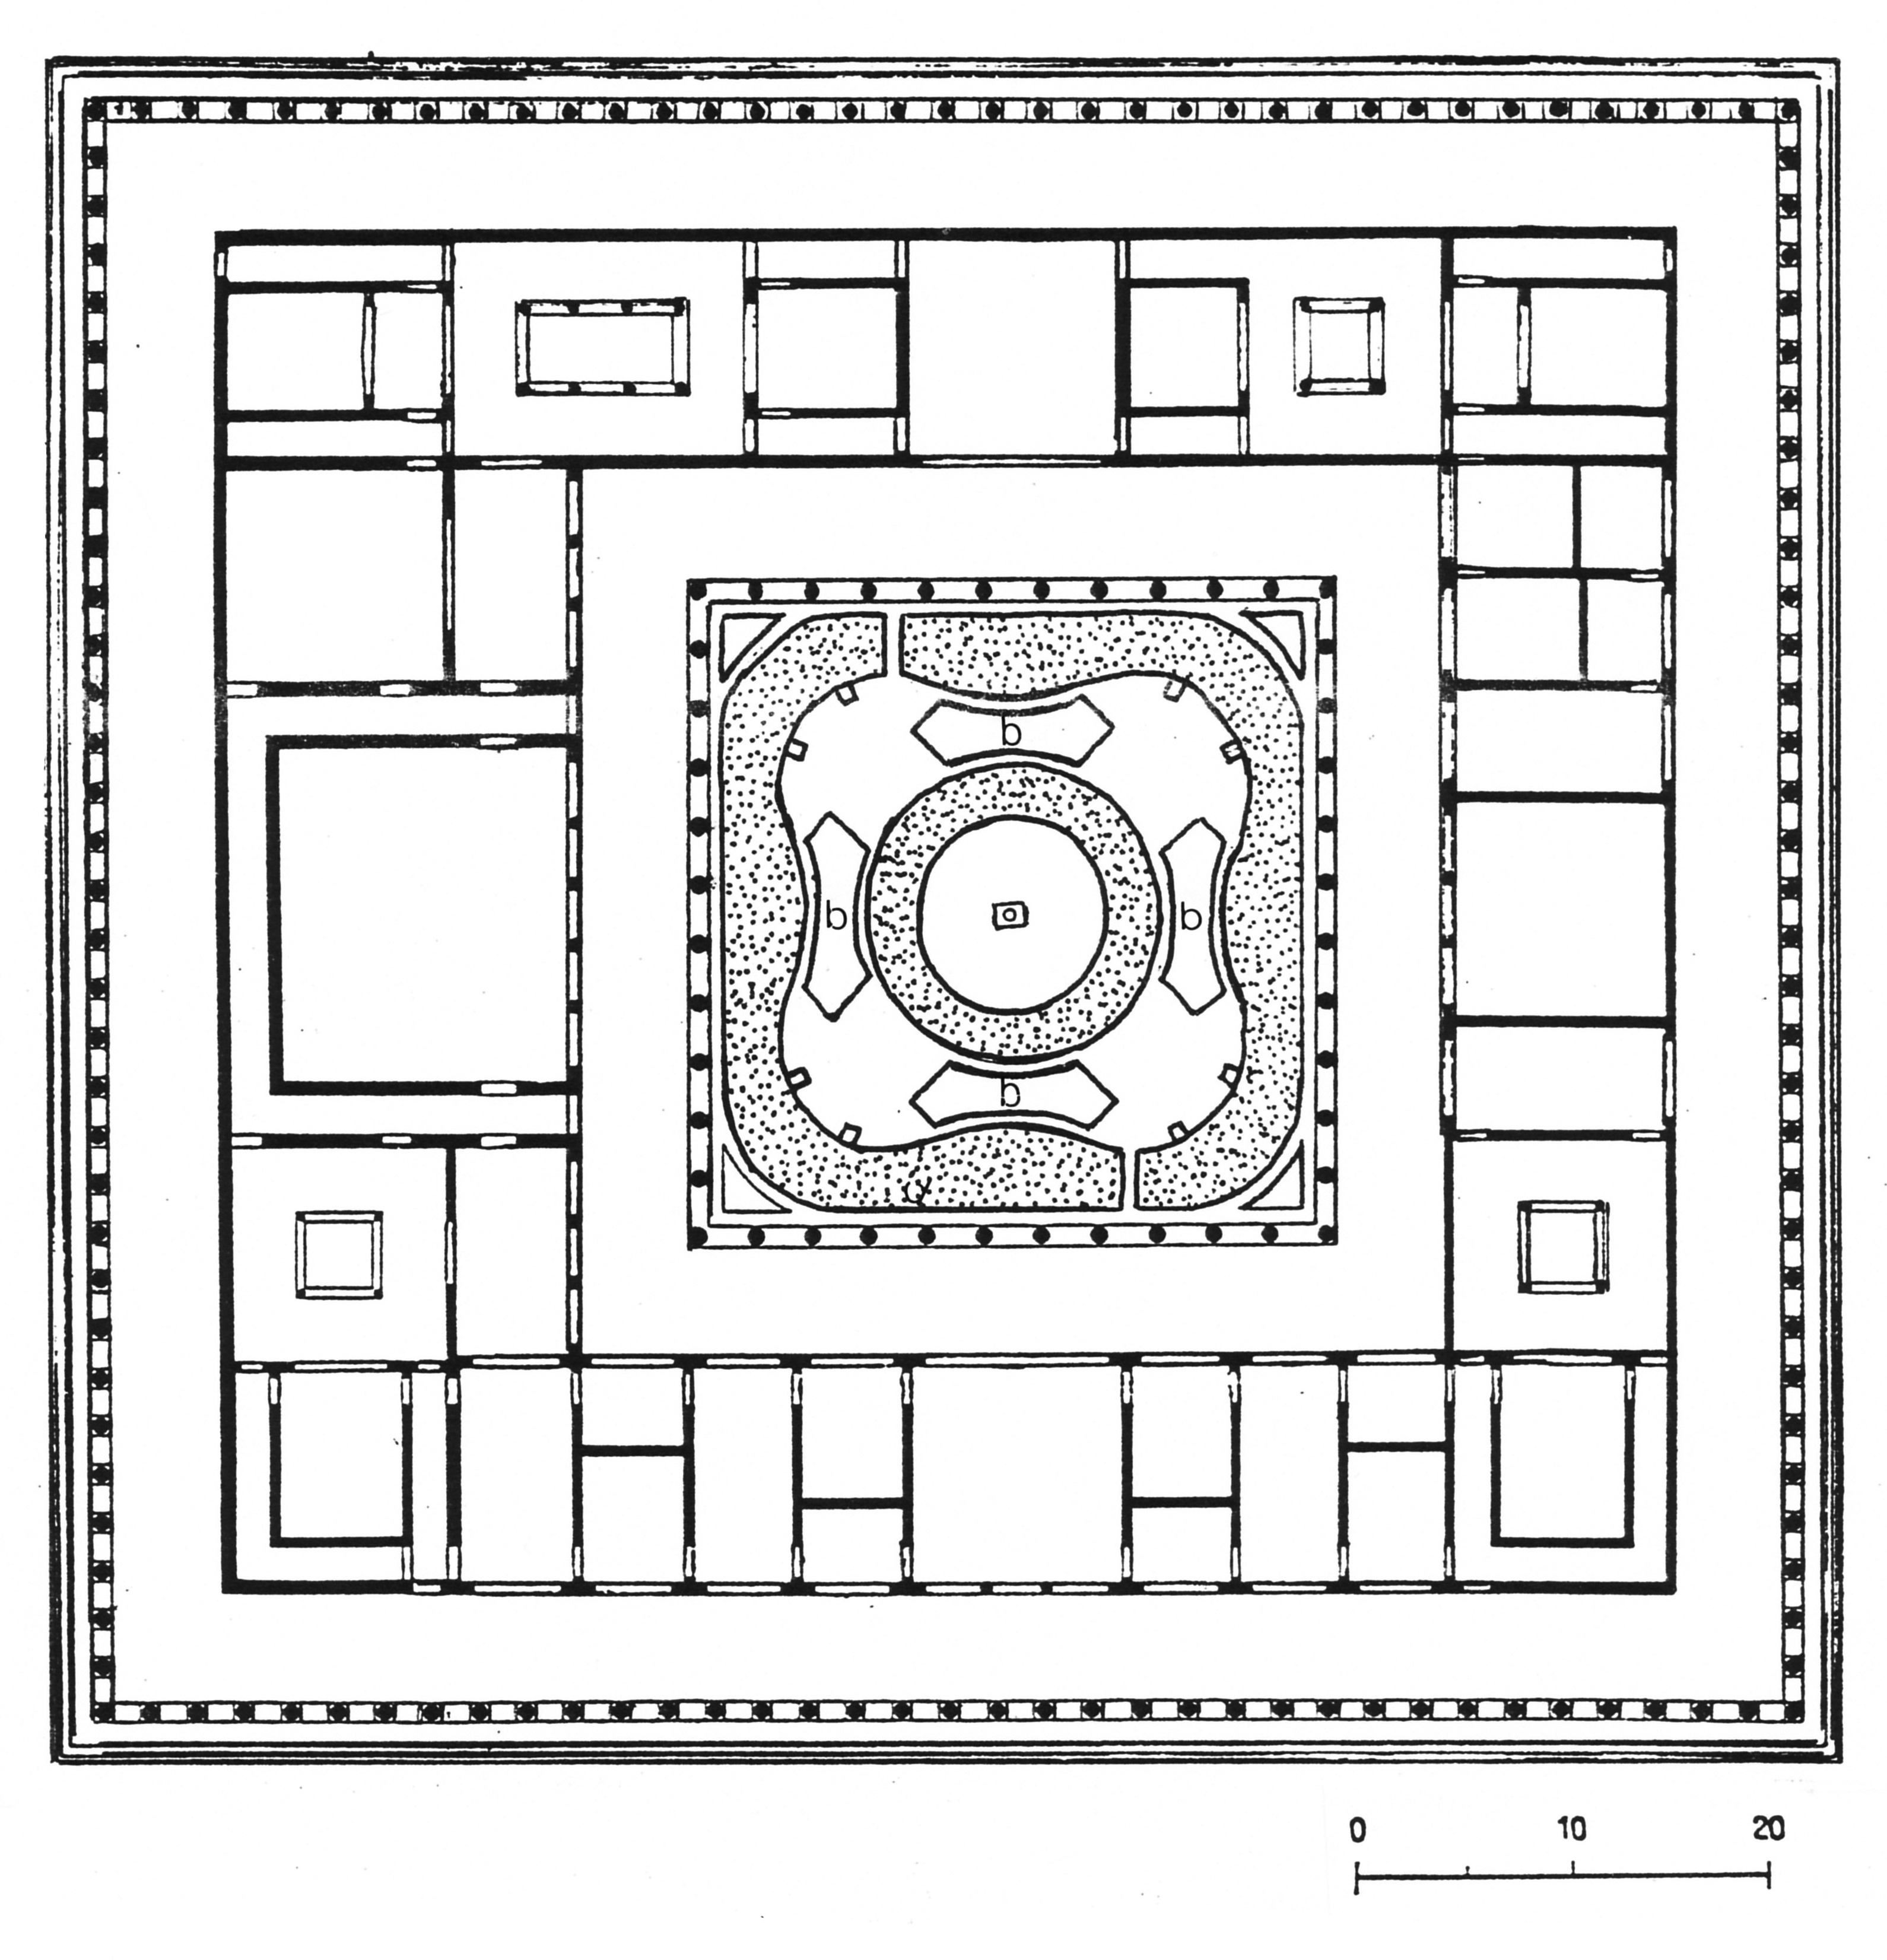 Plan of the Leonidaion with its quatrefoil, circular gardens and planting beds